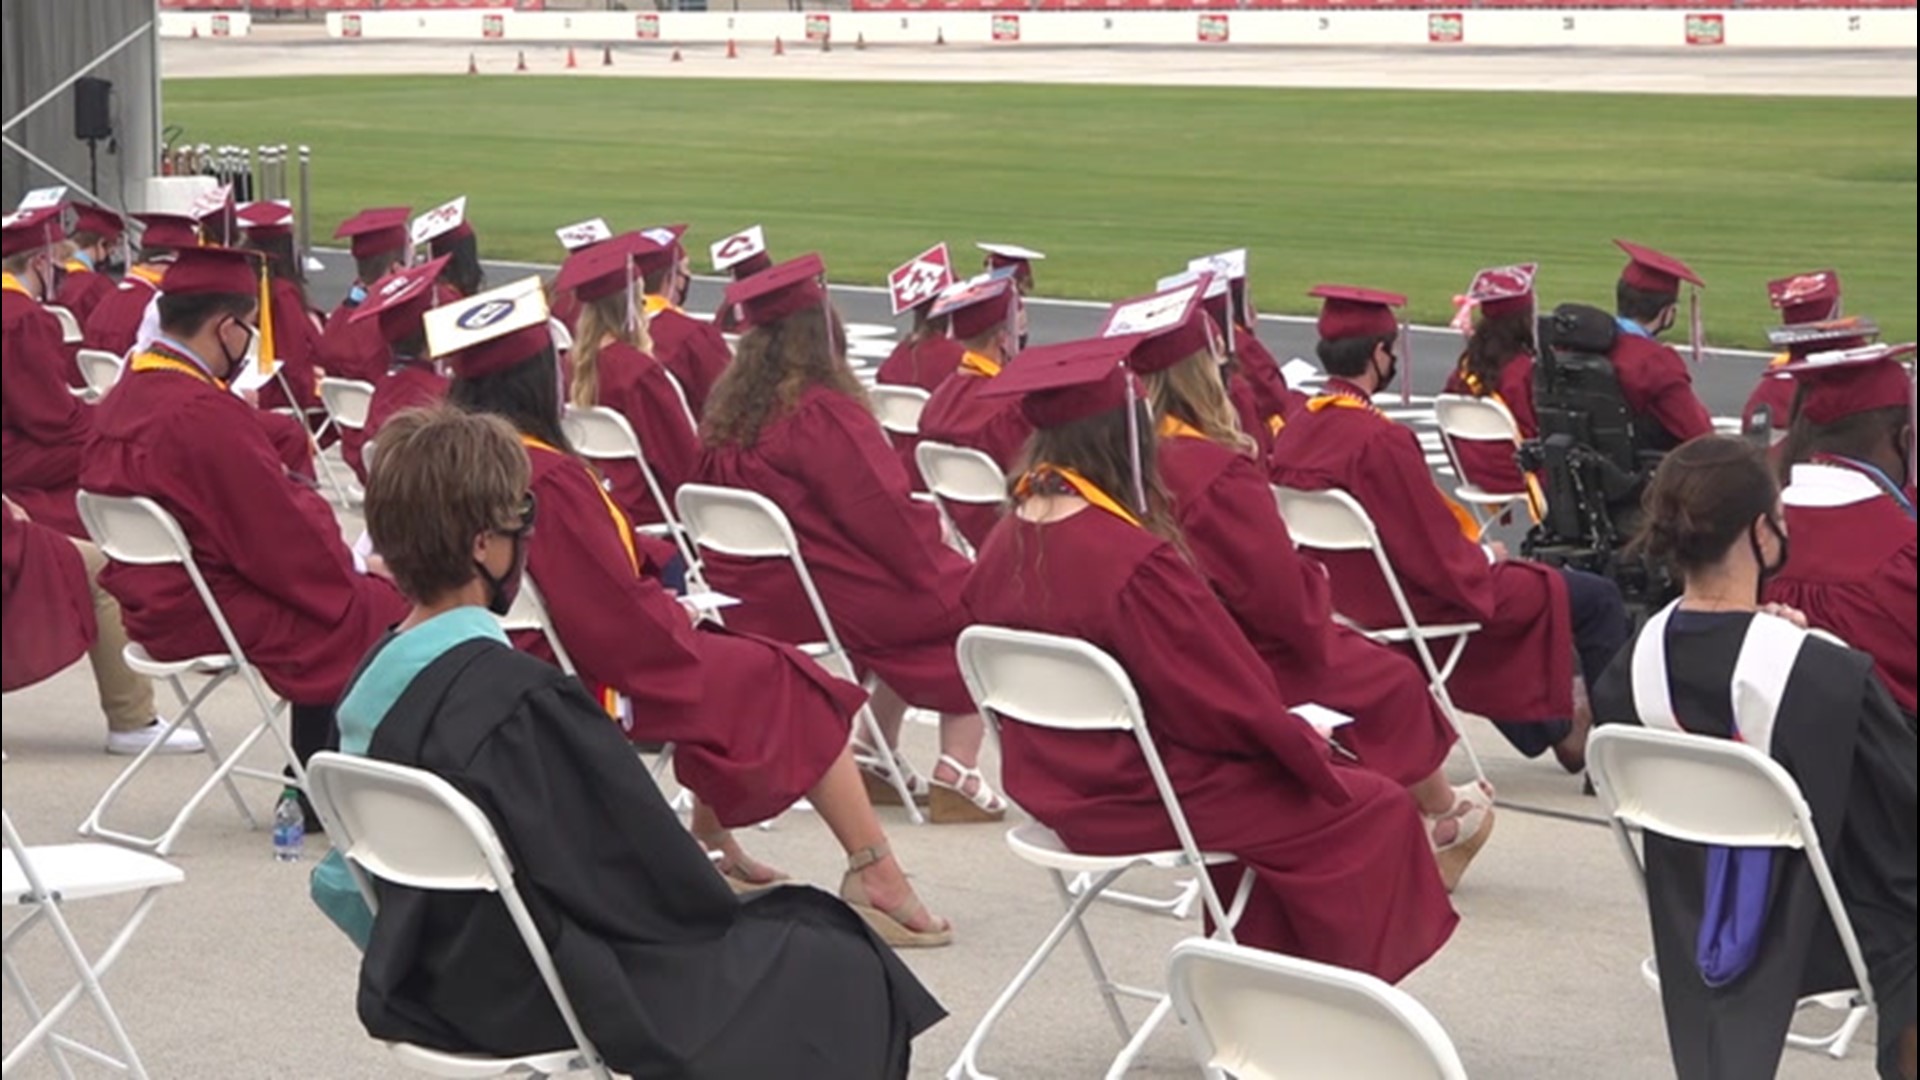 School leaders are finding creative ways to hold socially distanced graduations. Seniors in Texas crossed the finish line to get their diploma at one racetrack.